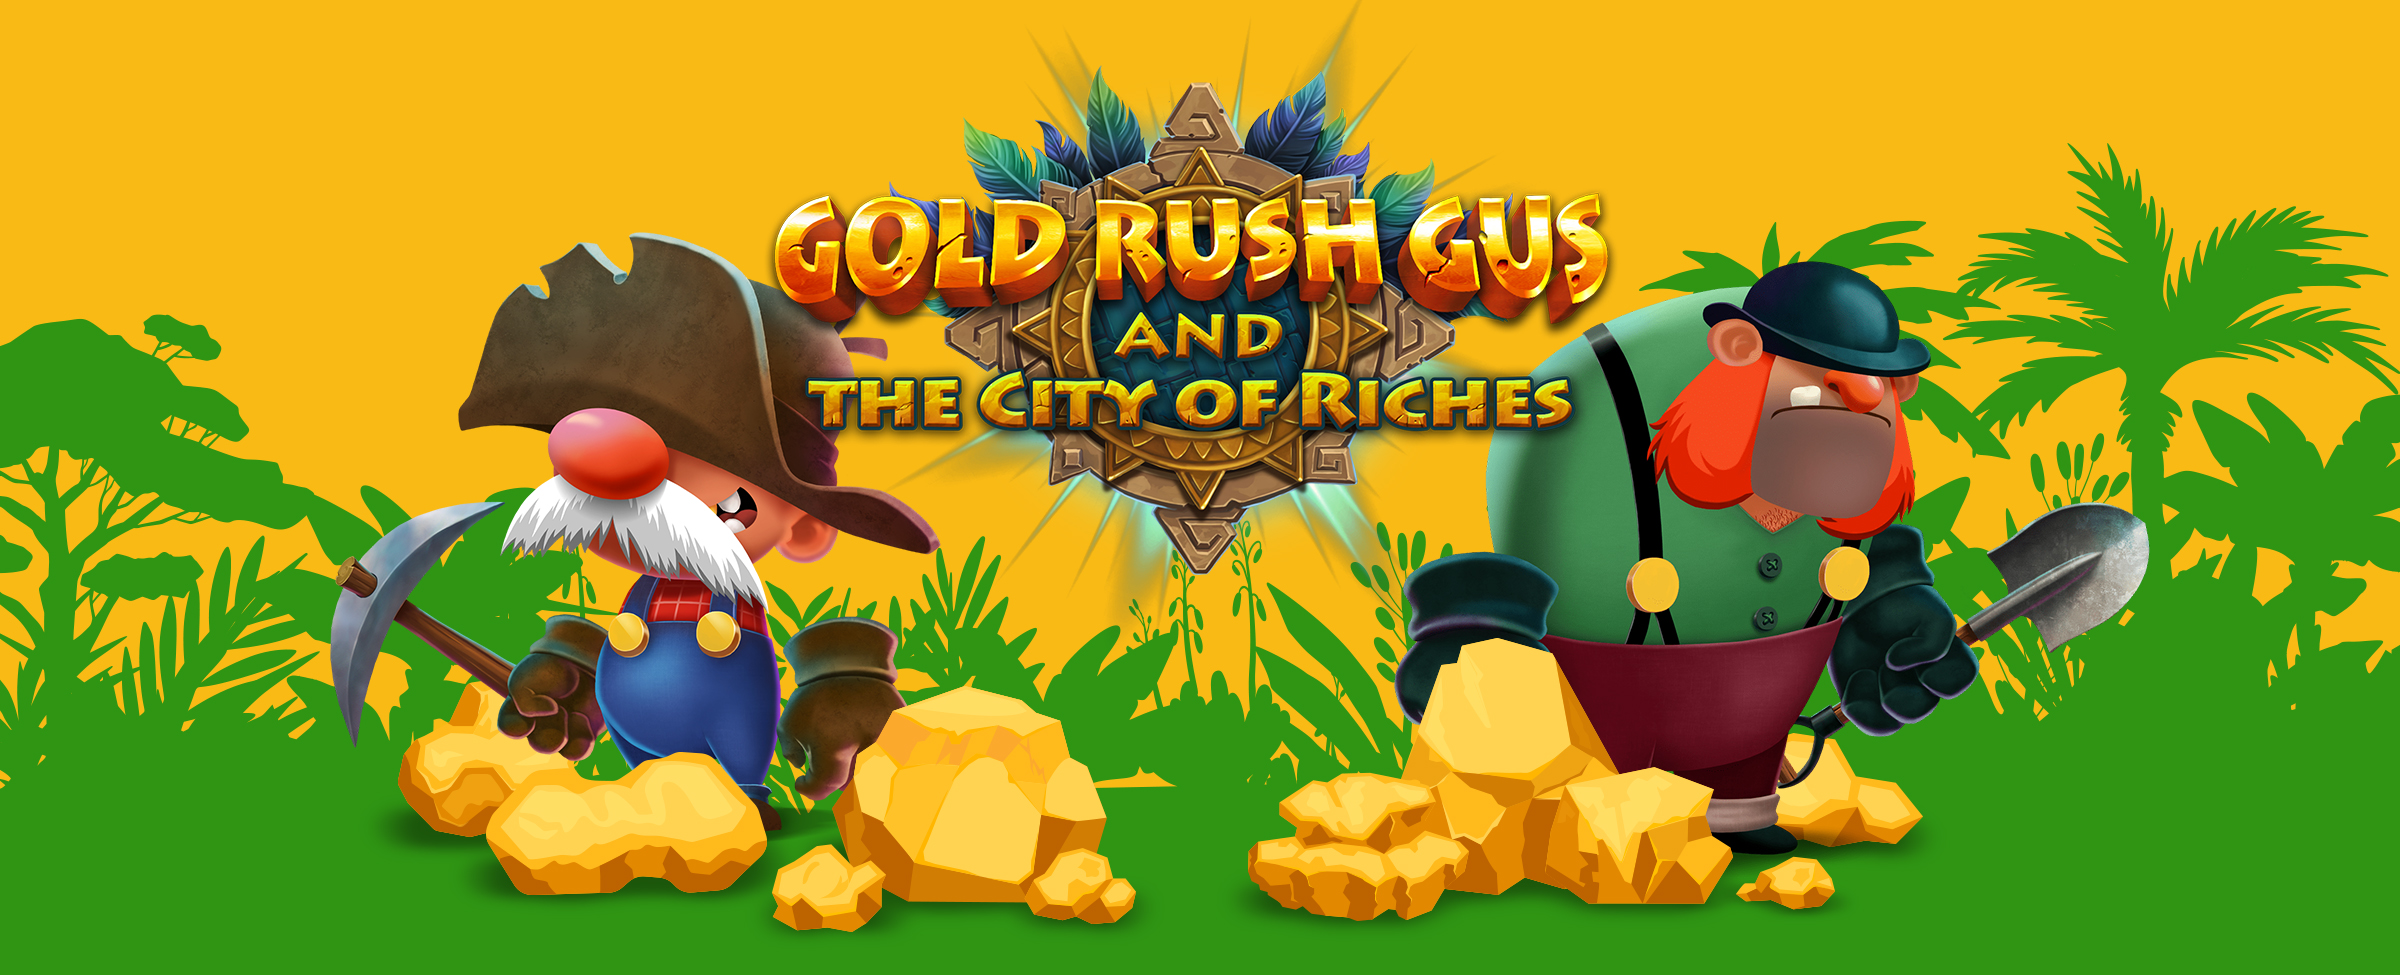 It would be remiss of Joe not to shout from the rooftop about this spanking new game starring everyone’s loveable champion: Gold Rush Gus and the City of Riches. Say no more! Try it now.